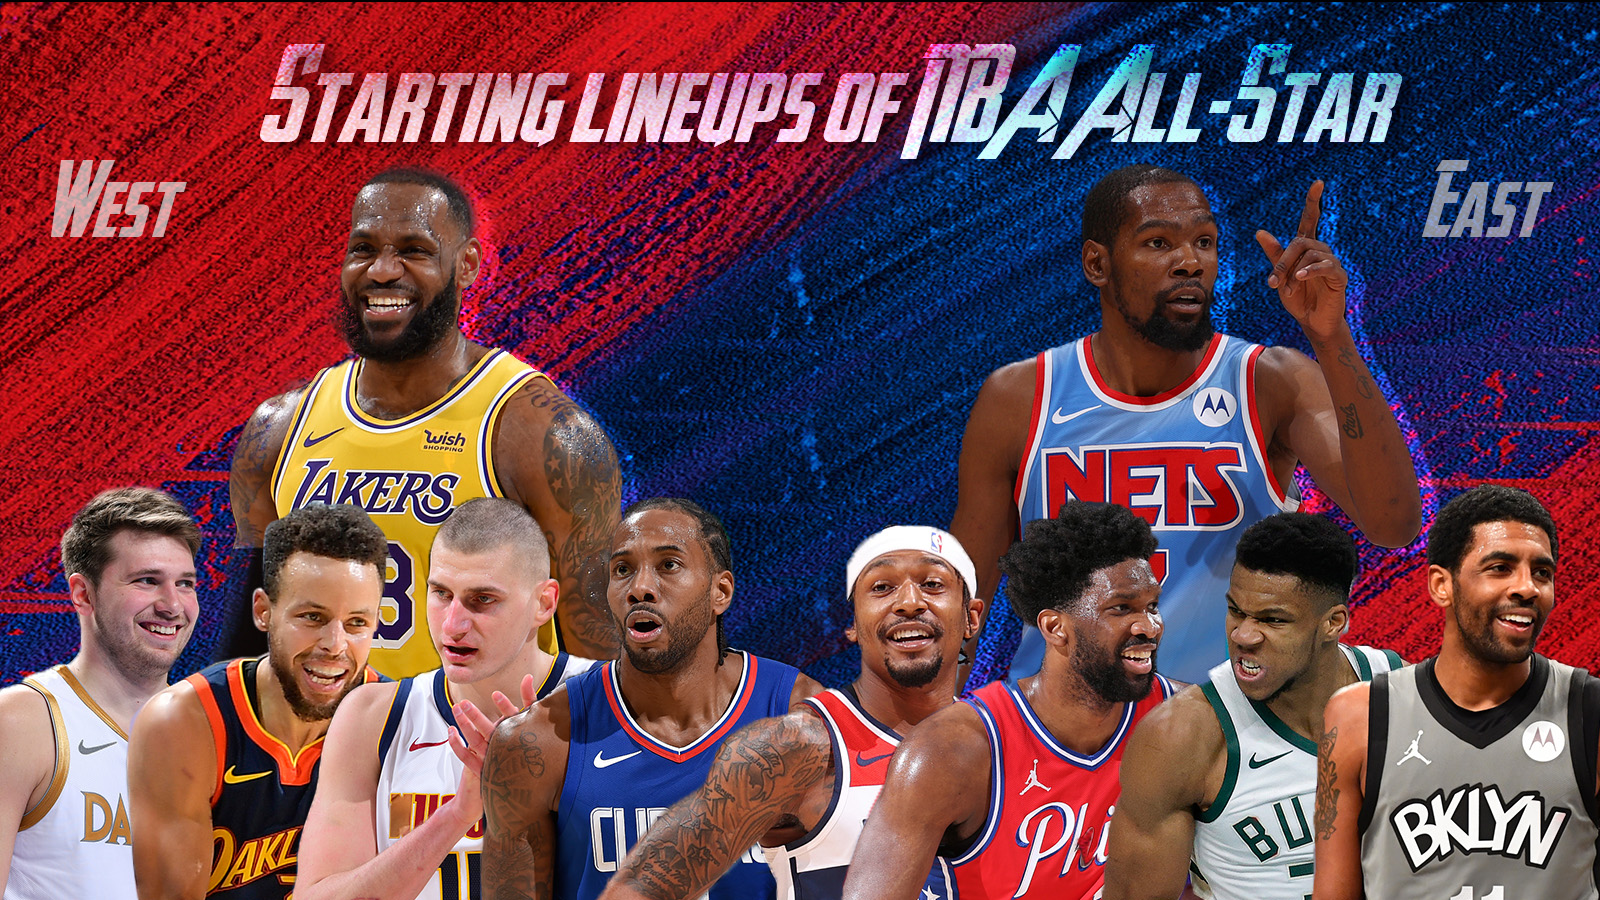 Here Are the Starting Lineups for This Year's NBA All-Star Game